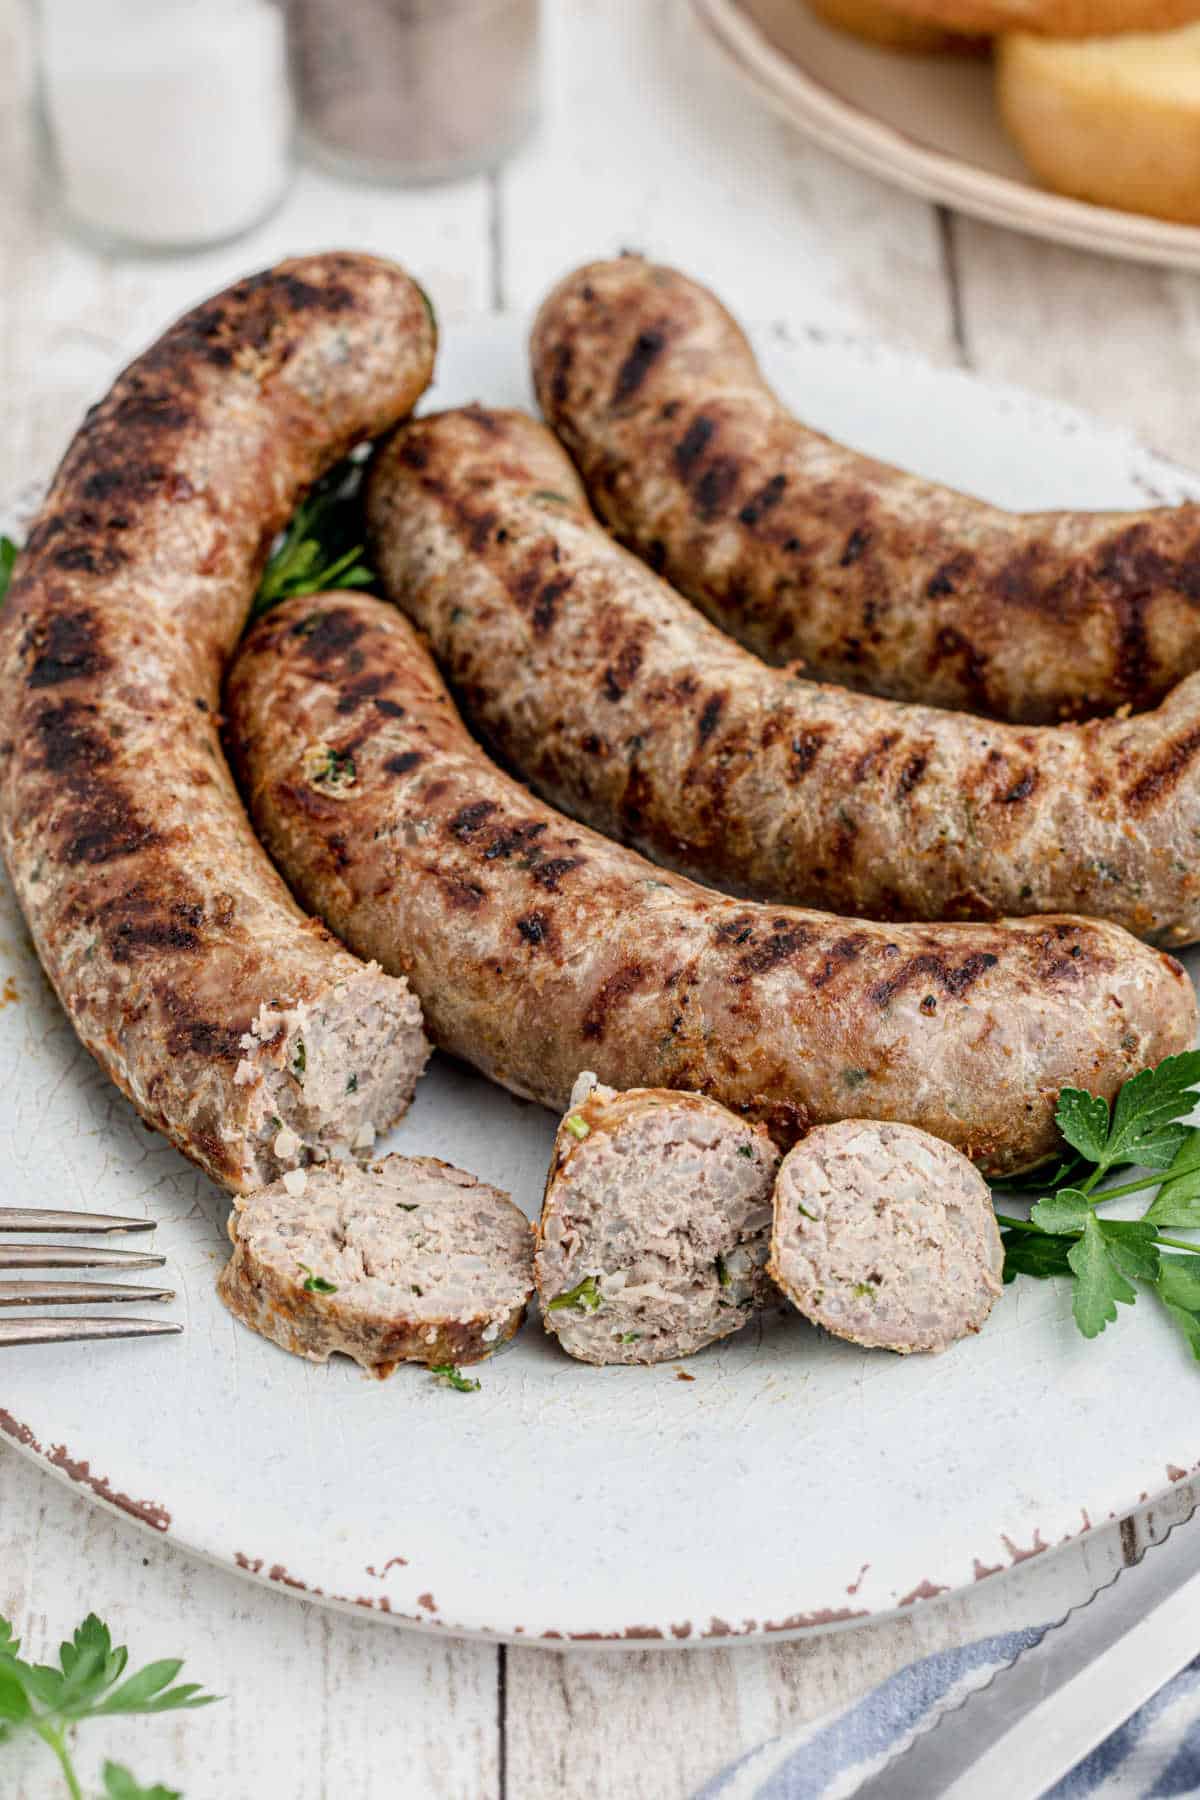 homemade boudin sausage on a plate with a few slices made out of one of them